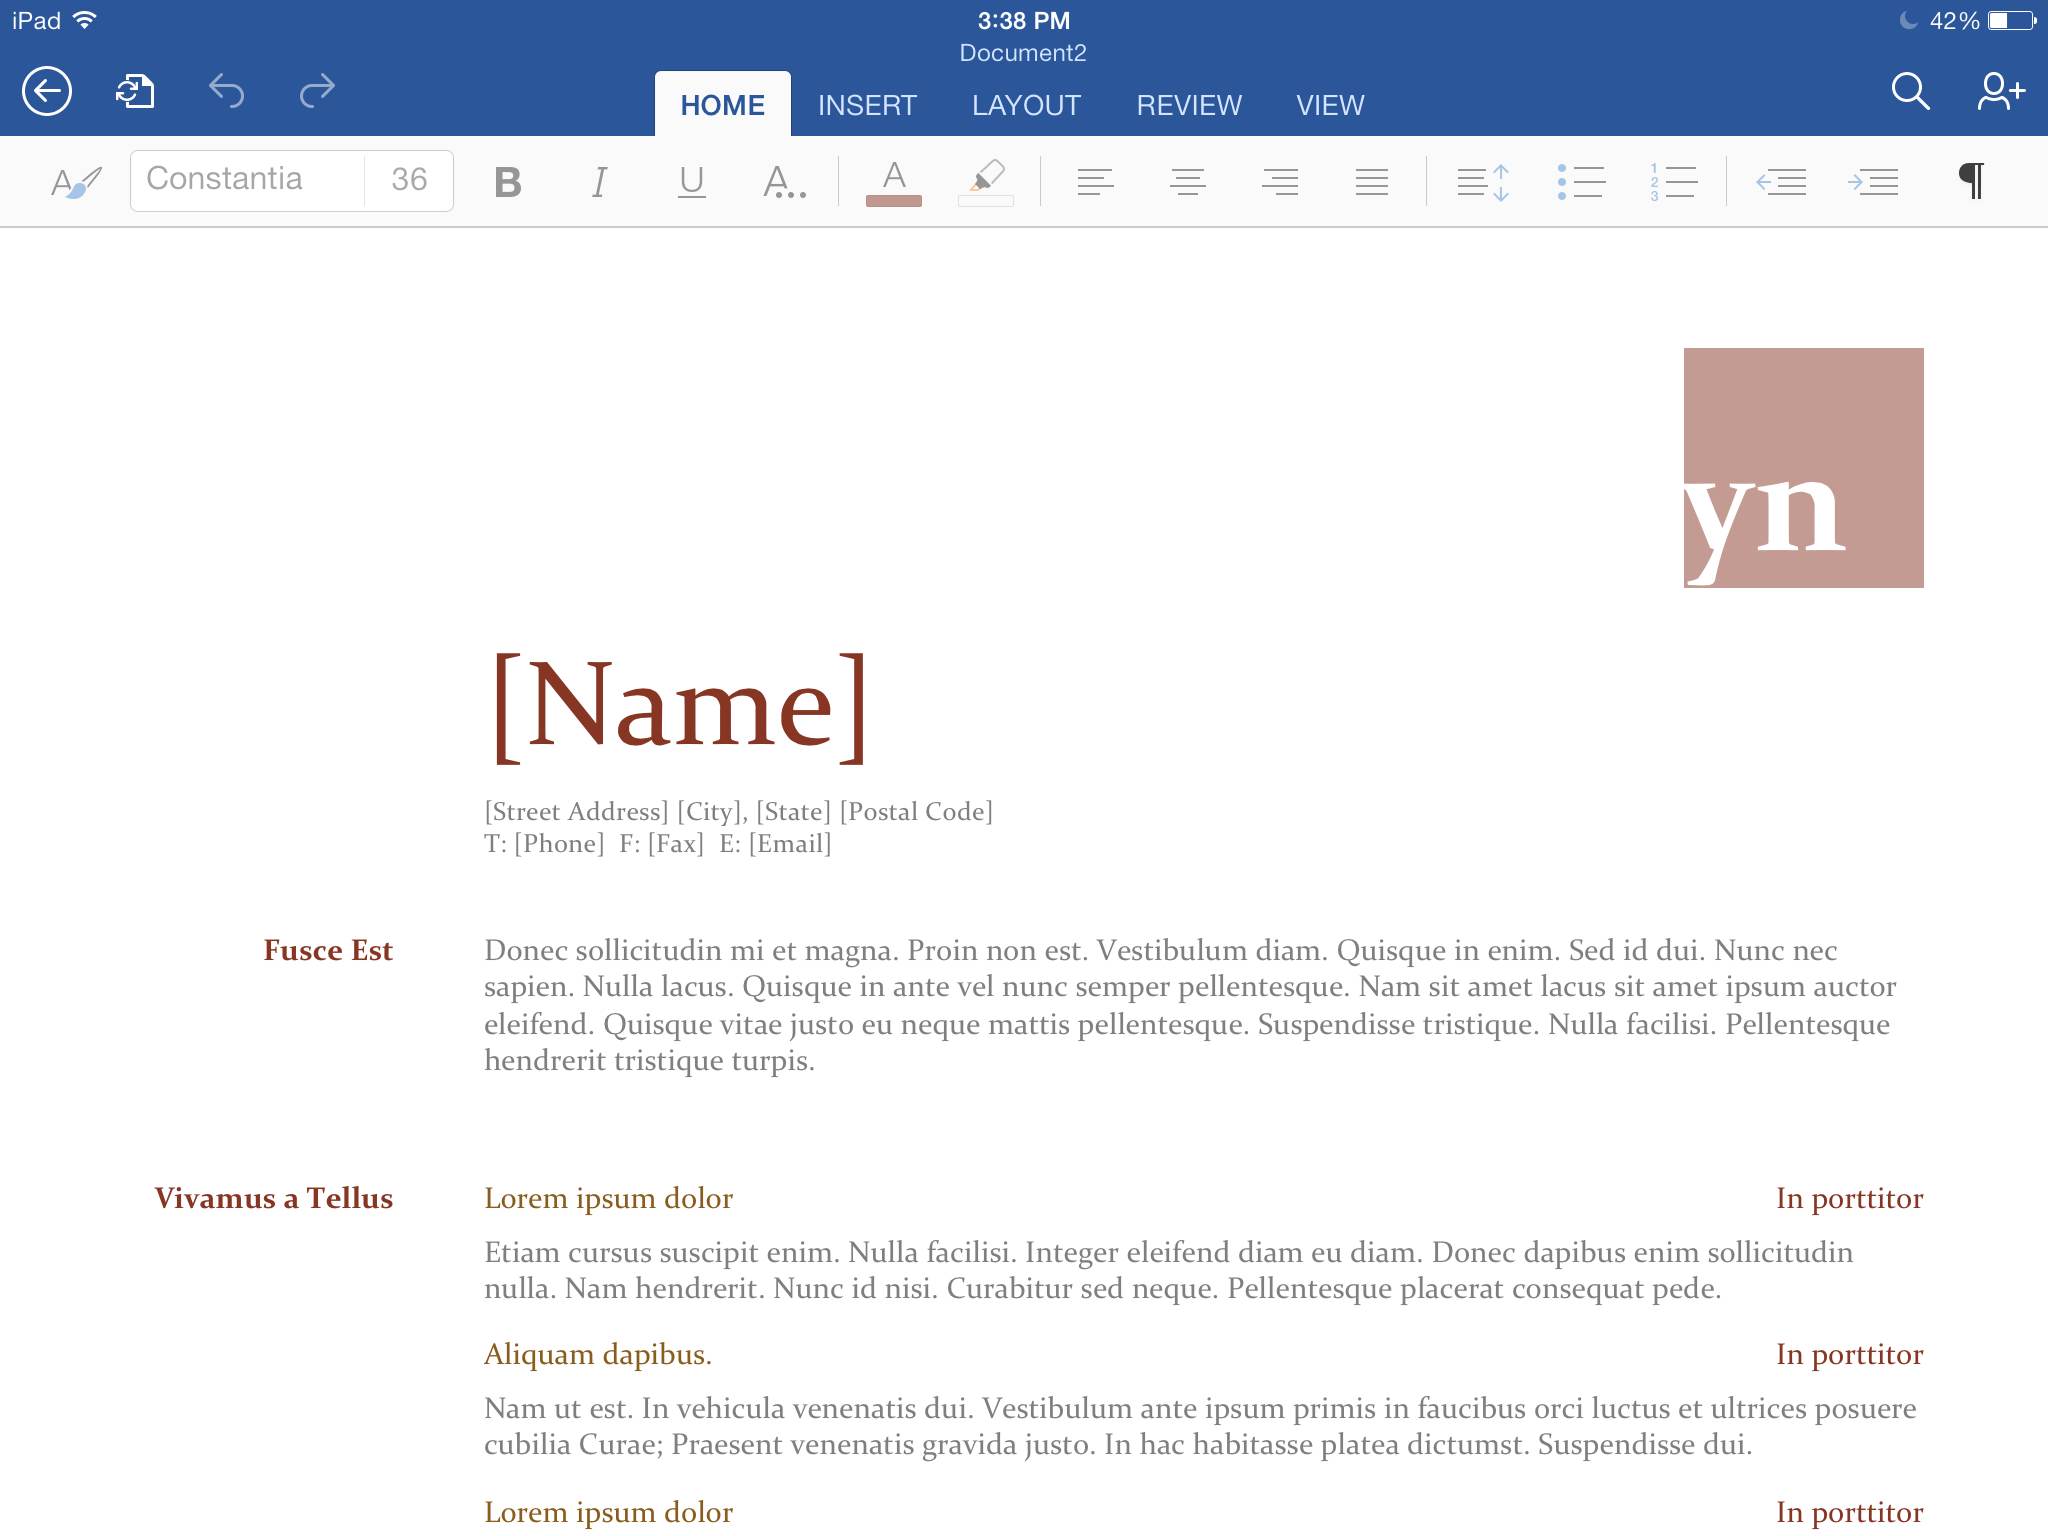 Microsoft Office For iPad: Everything You Need To Know